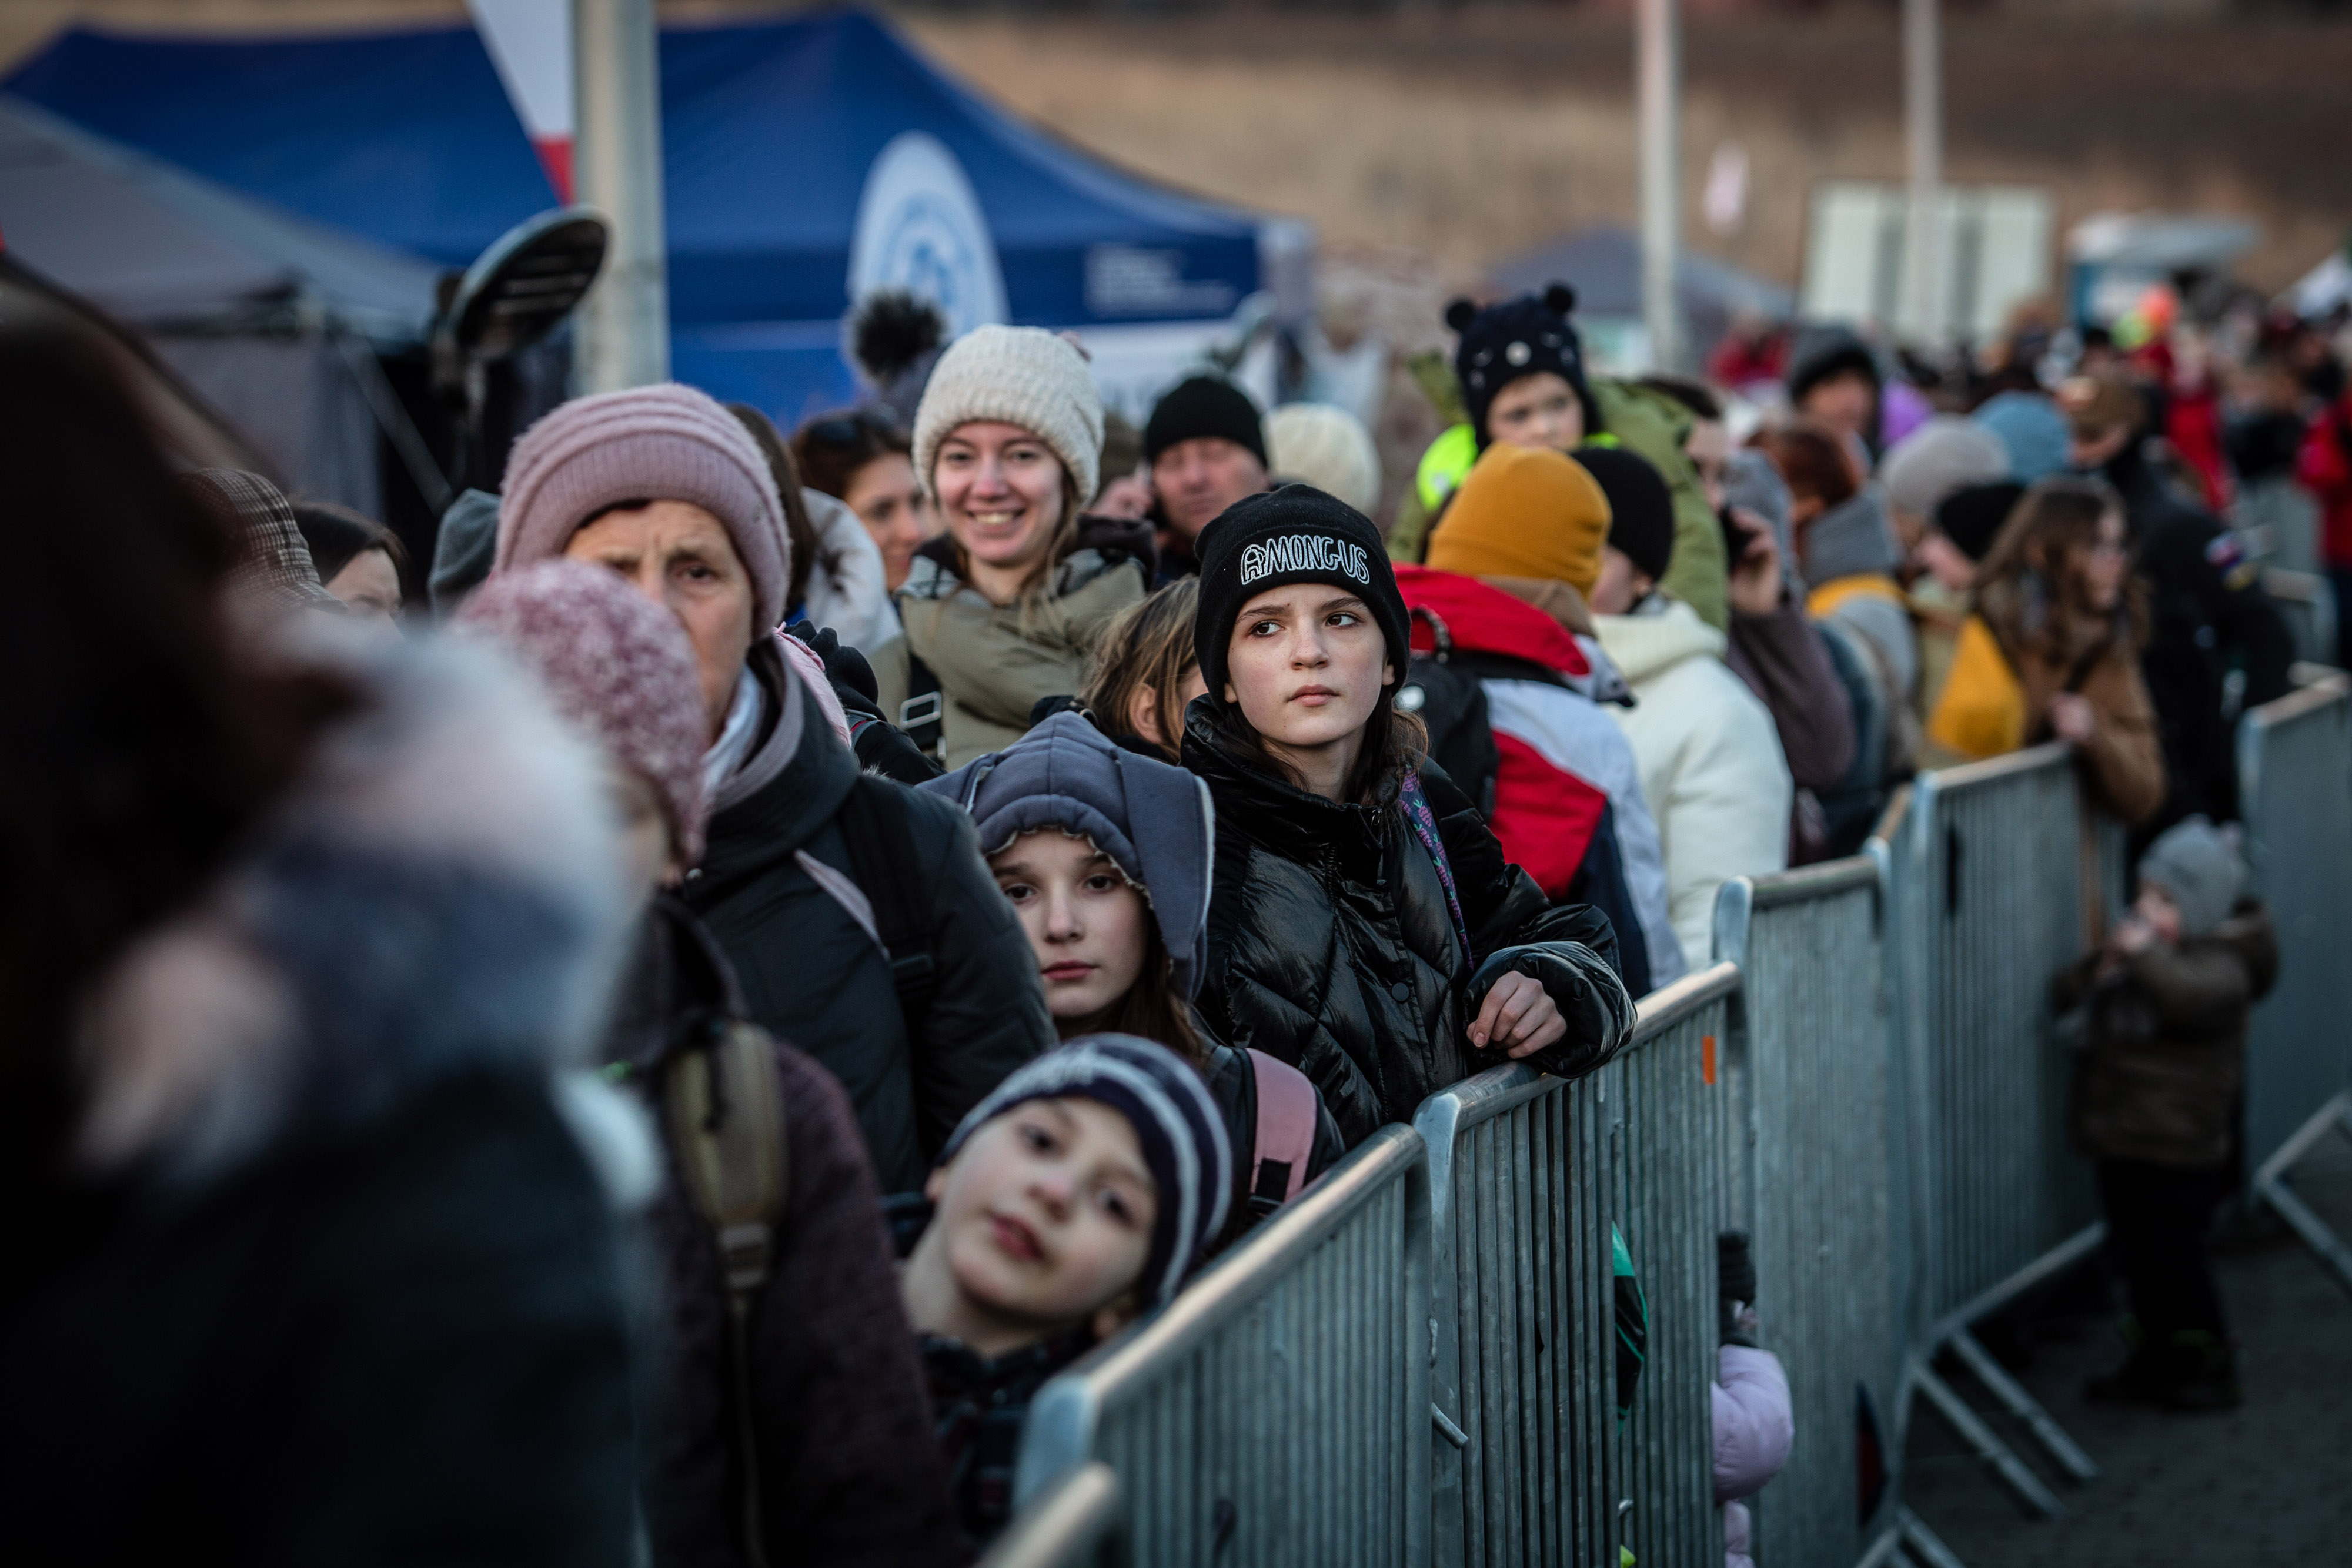 Ukrainian refugees at the Medyka border crossing in Poland&nbsp;last March. The International Criminal Court issued an arrest warrant for Vladimir Putin tied to the alleged abduction of Ukrainian children over the course of the year-long war.